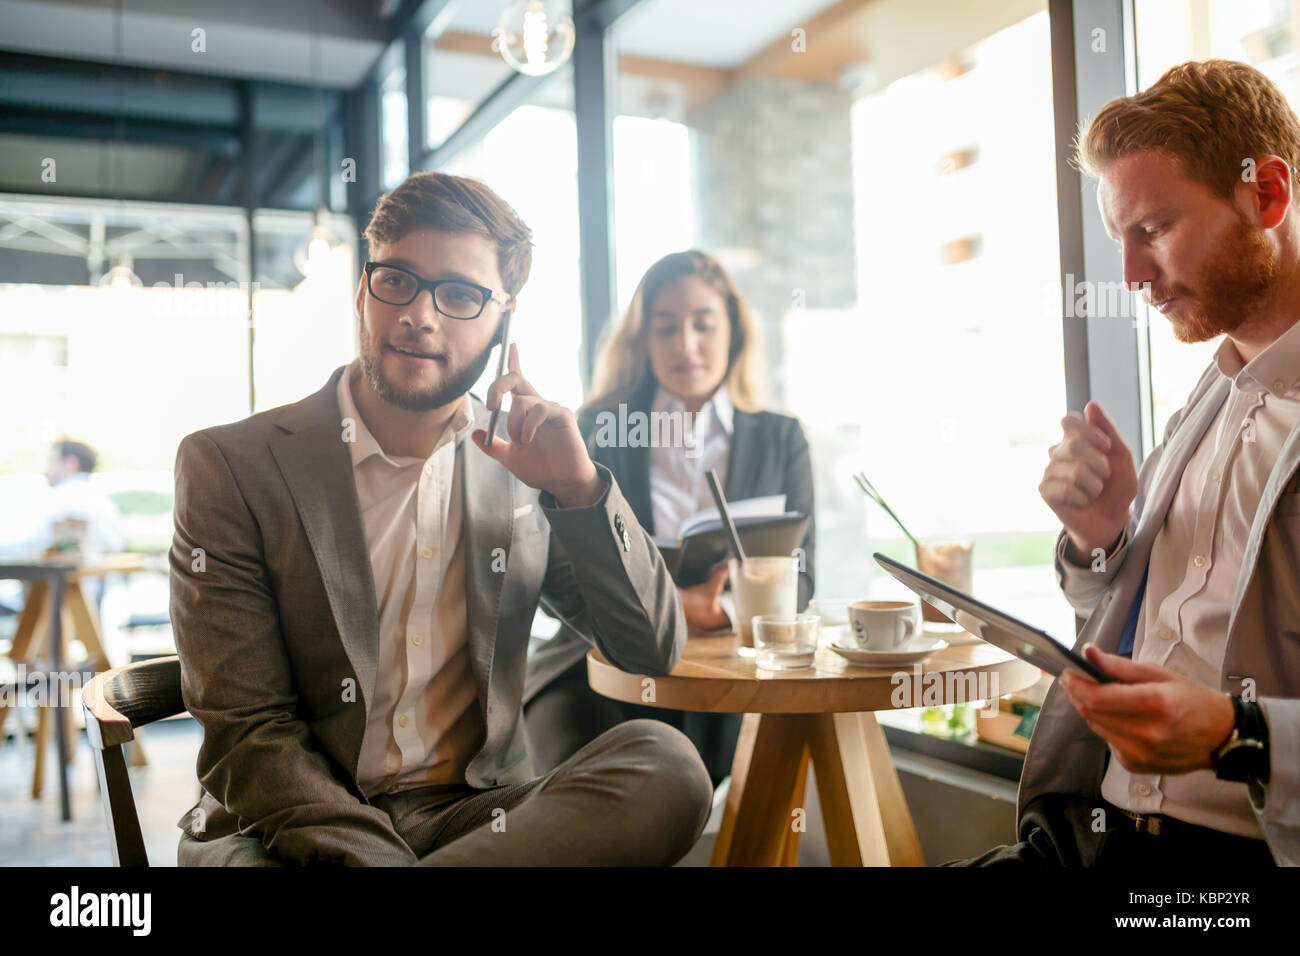 Business people talking and laughing together Stock Photo - Alamy